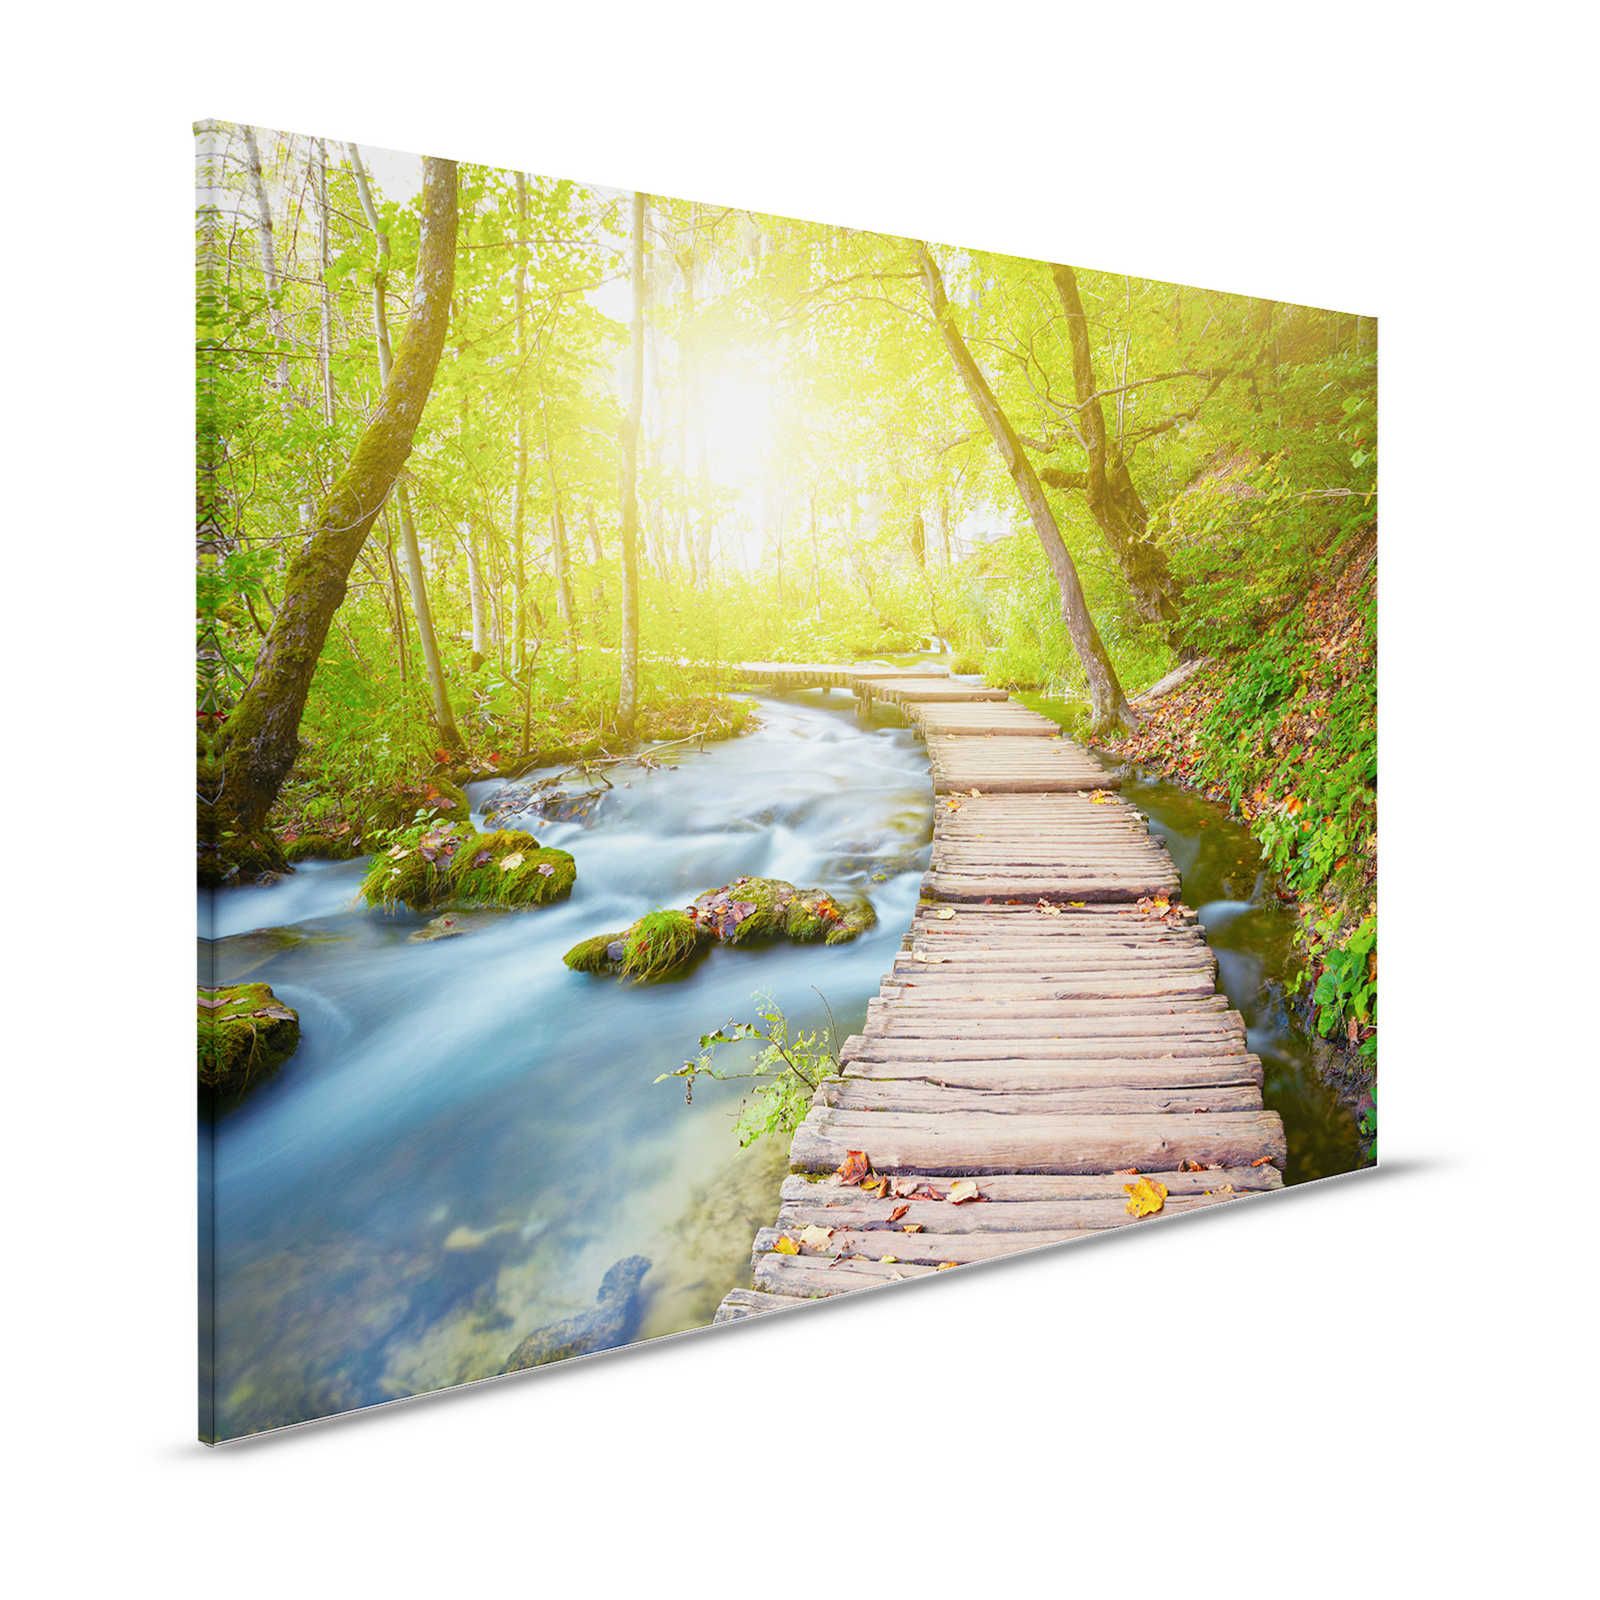 Canvas painting River with footbridge in the forest at sunrise - 1,20 m x 0,80 m
